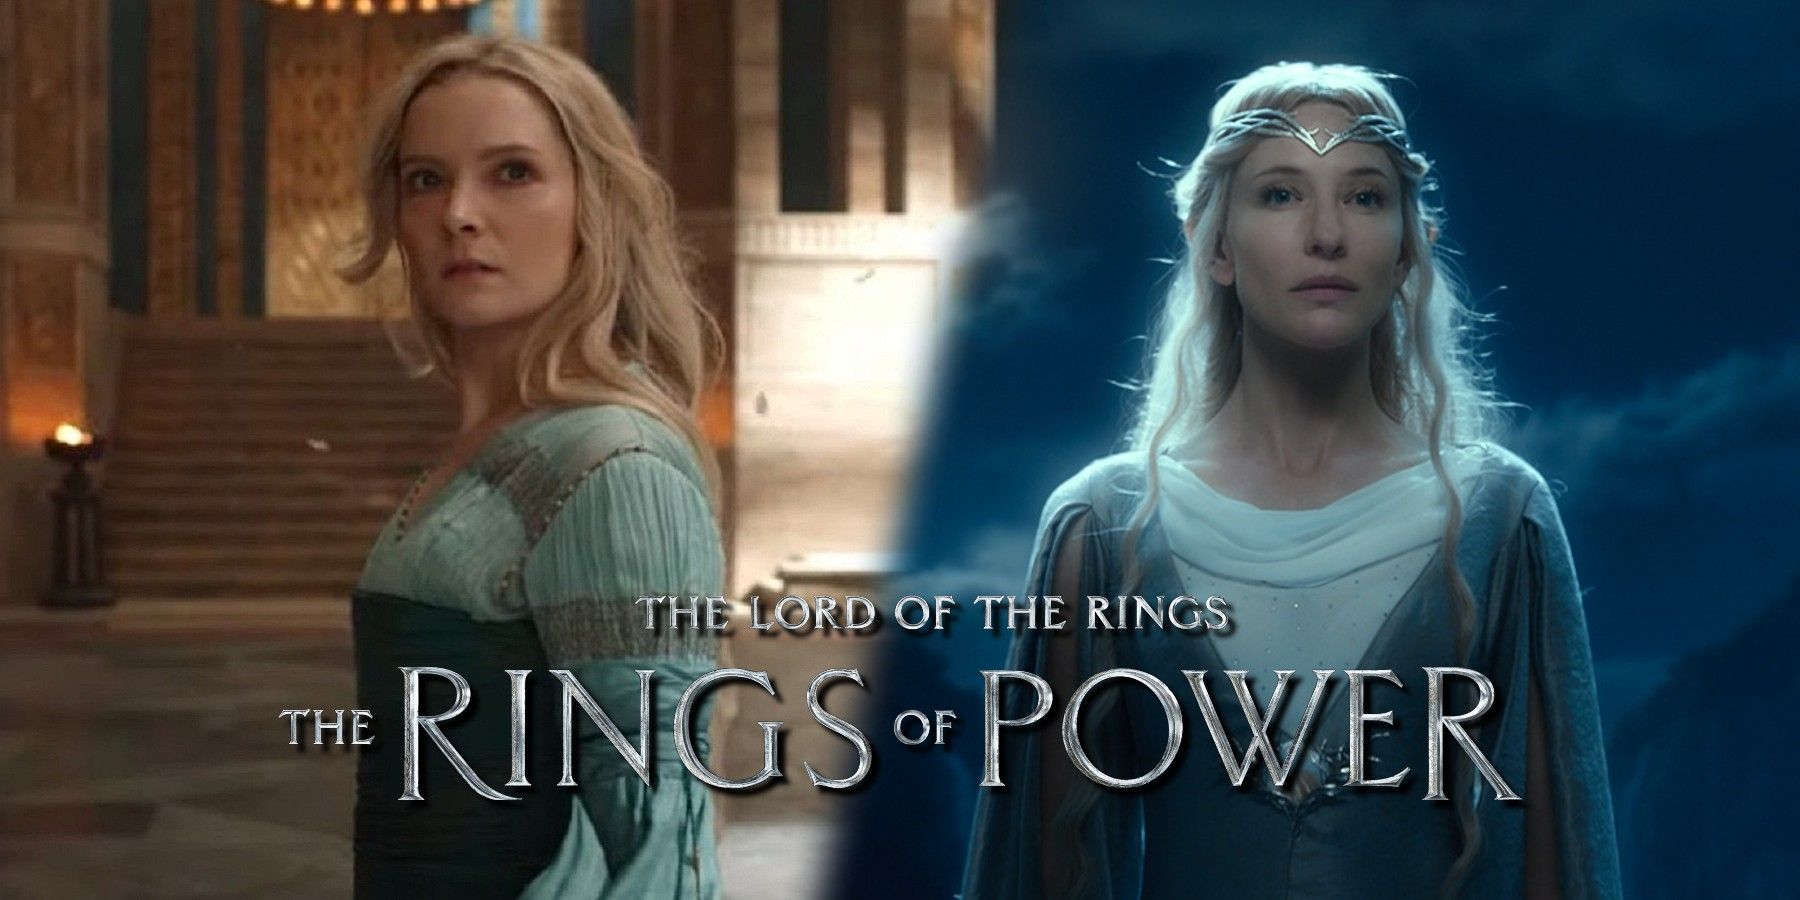 Cate Blanchett Pitched a Secret Second 'Lord of the Rings' Role